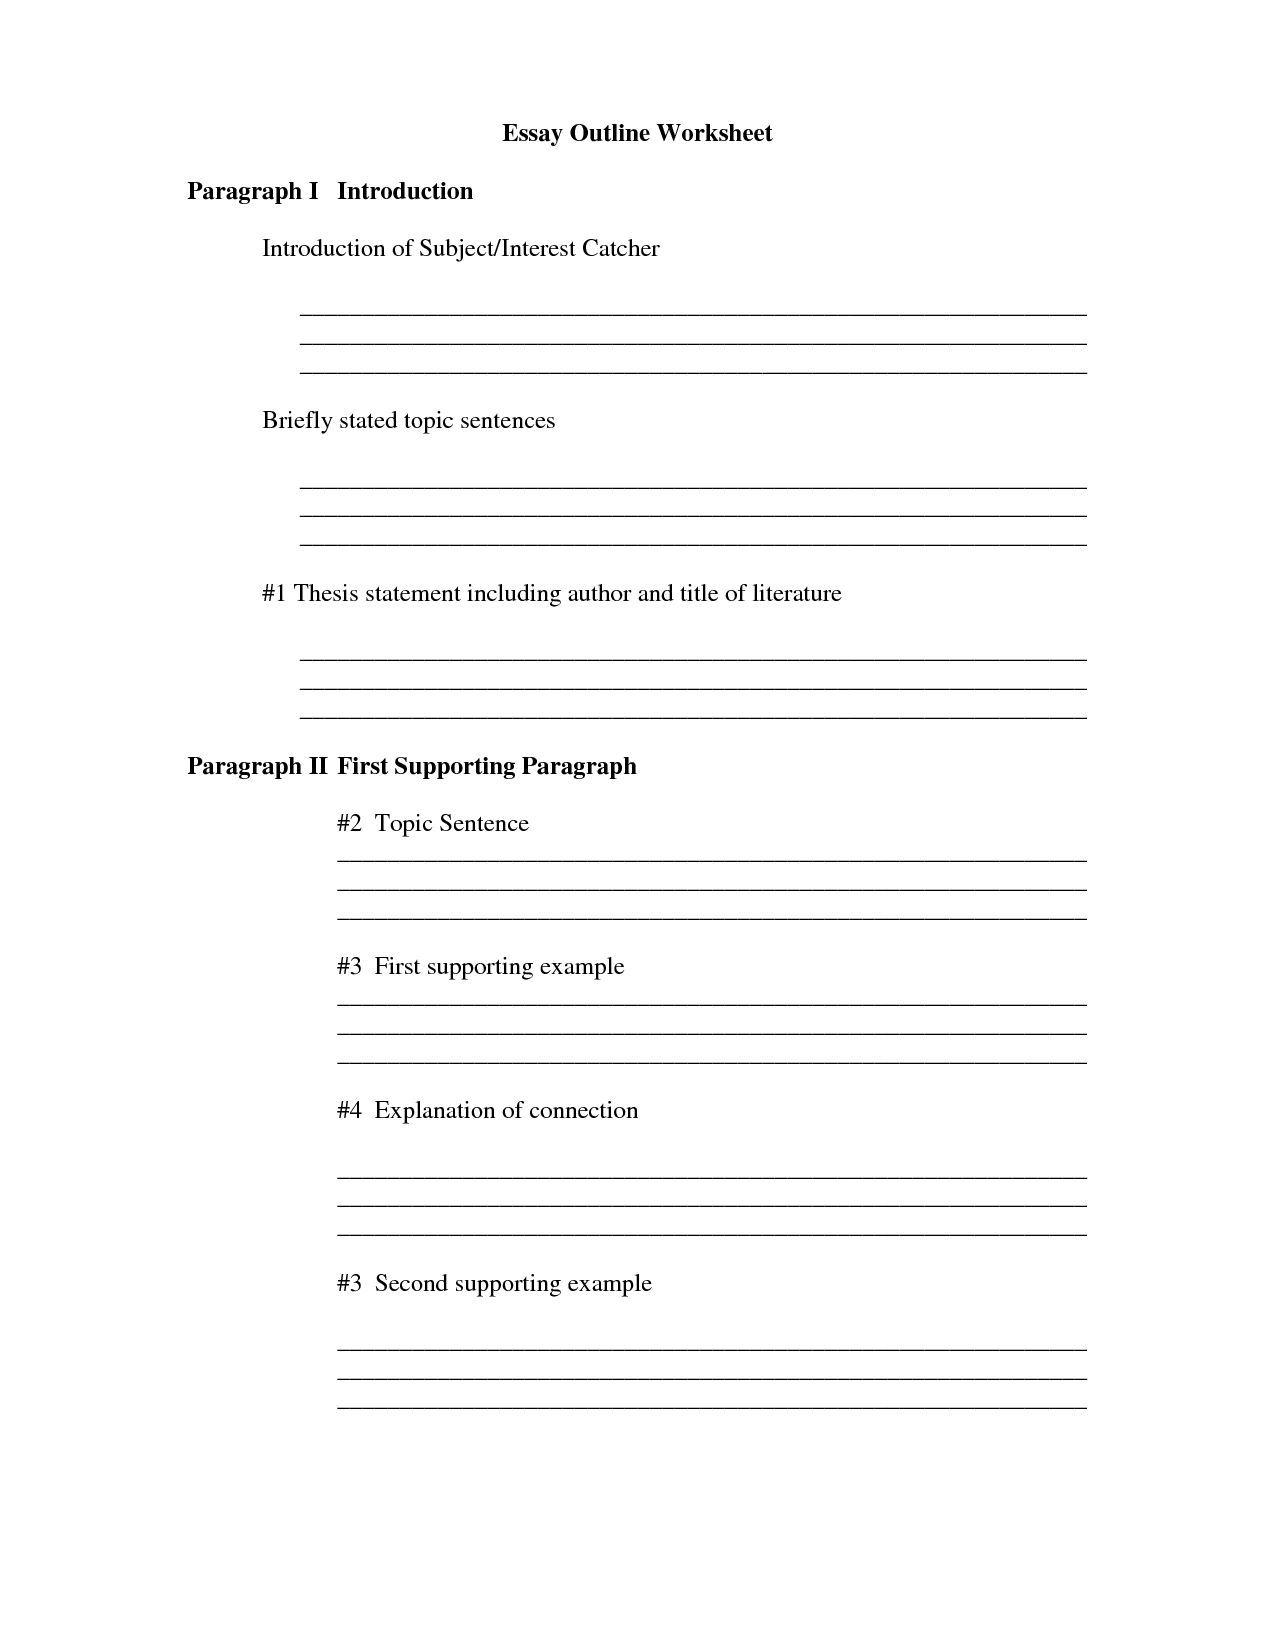 5 Paragraph Essay Worksheets - Learny Kids